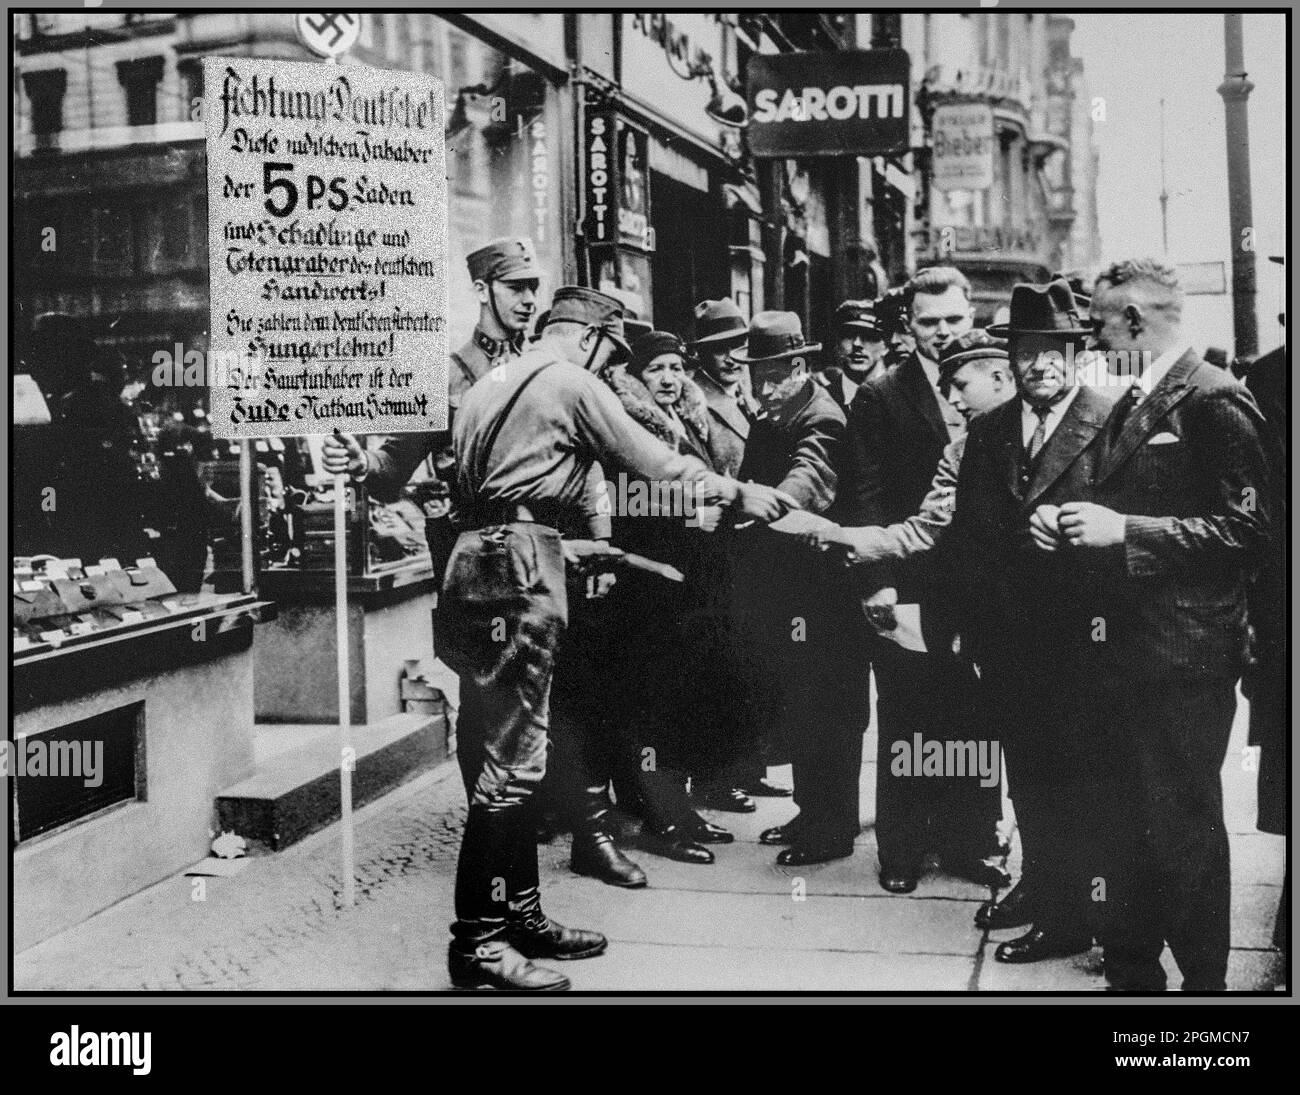 Nazi Germany 1930s Anti semitism anti Jewish racist SA pickets distribute boycott pamphlets to German pedestrians. The sign held by one SA  Sturmabteilung member reads: 'Attention Germans. These Jewish owners of [five and dime] stores are the parasites and gravediggers of German craftsmen. They pay starvation wages to German workers. The shop owner is the Jew, Nathan Schmidt.' Antisemitism in Nazi Germany Stock Photo